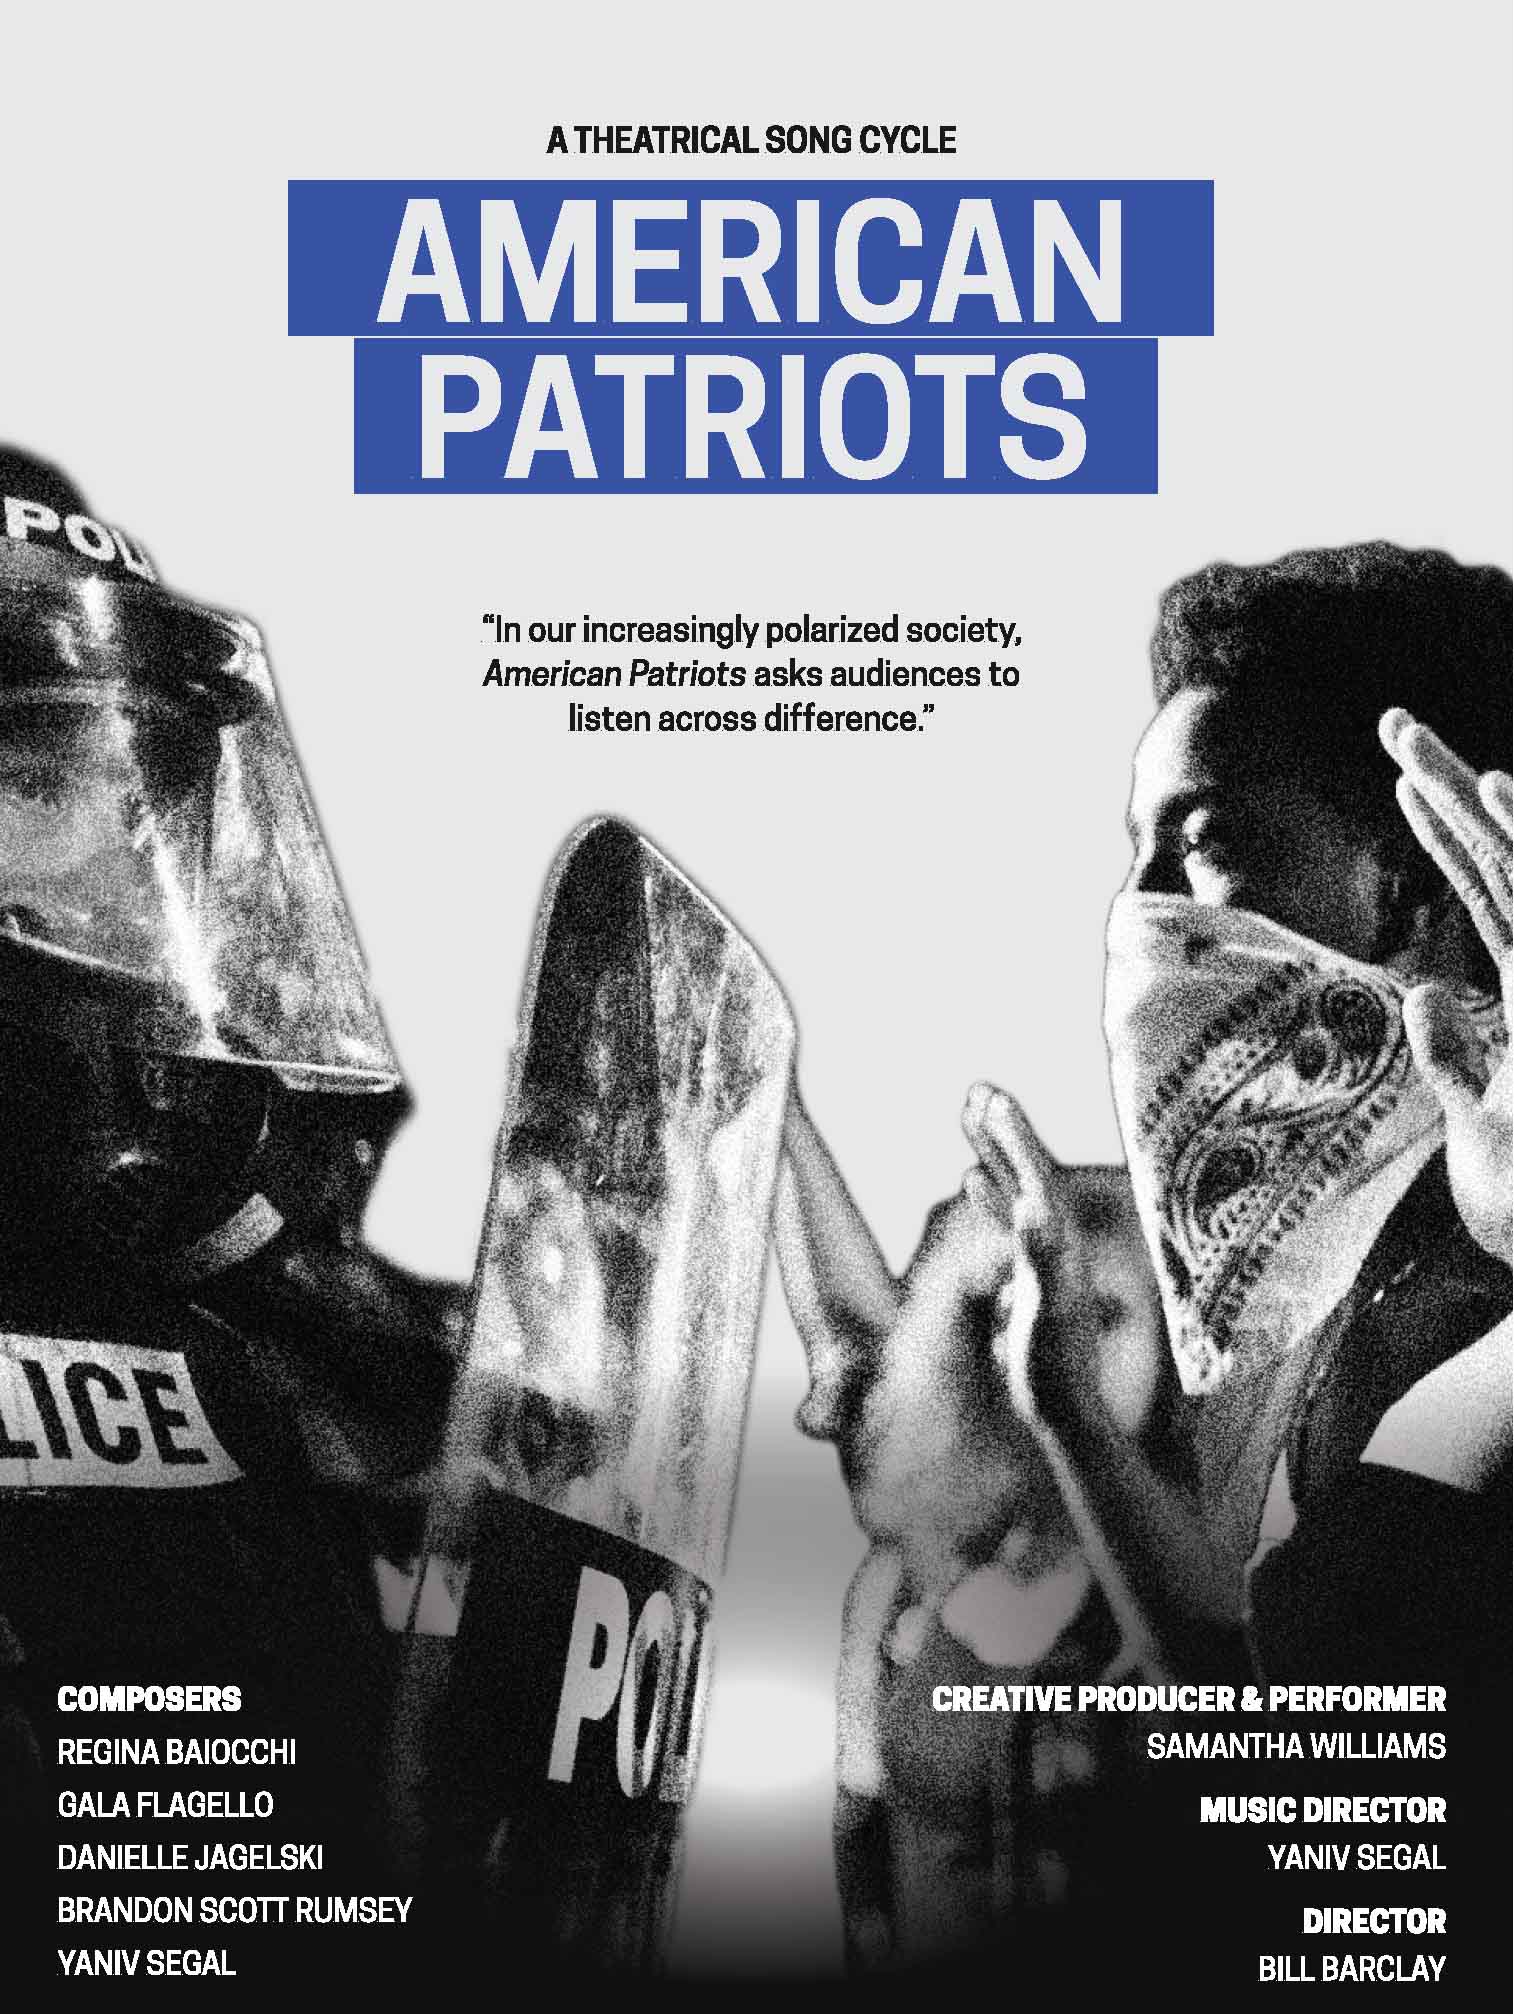 A Theatrical Song Cycle - American Patriots. Artistic credits with an image of police in riot gear facing protestors.